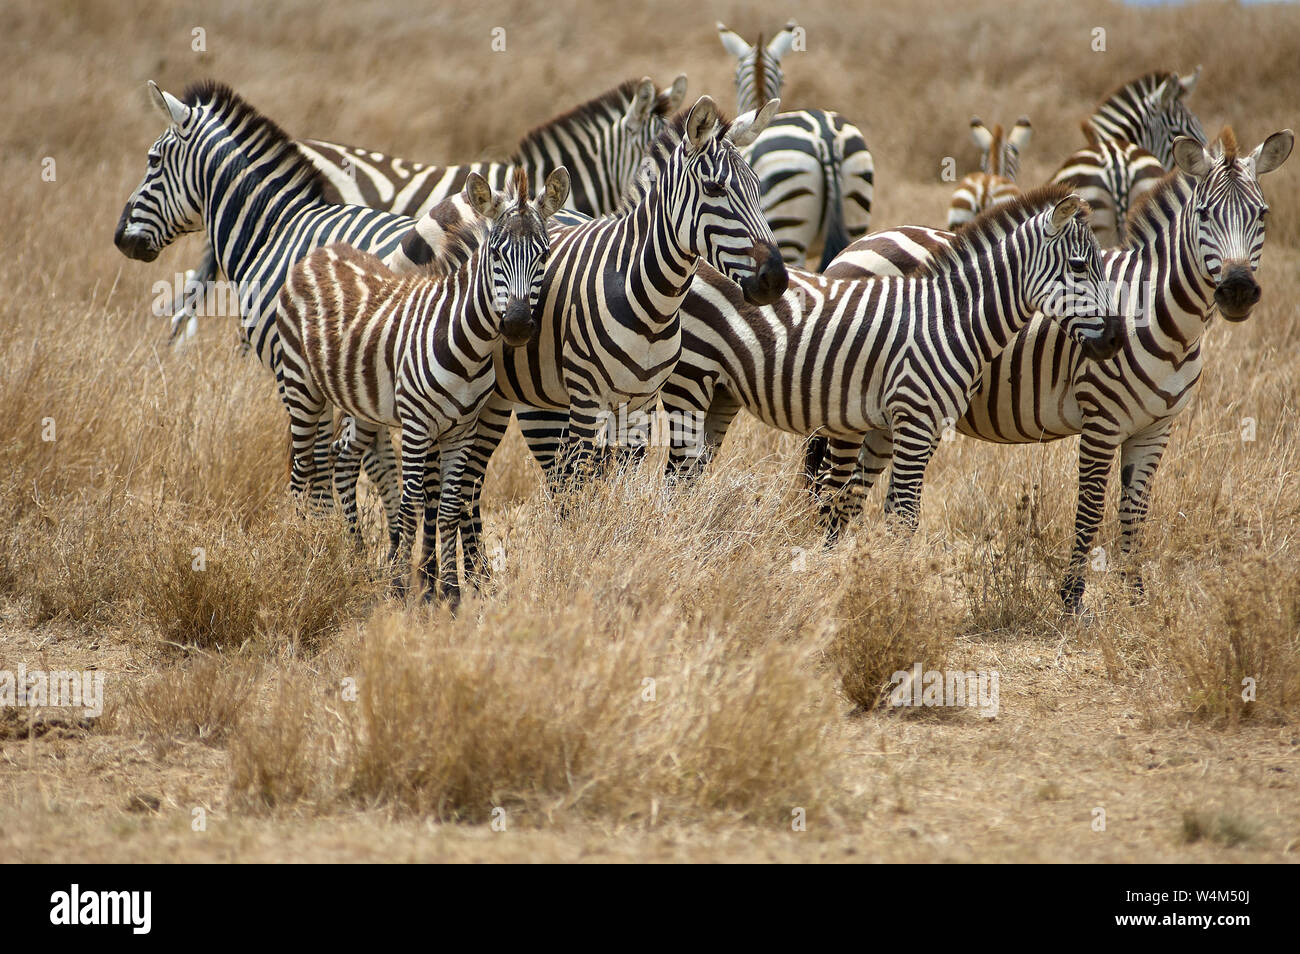 A small herd of zebras scanning their environment carefully for hazards Stock Photo